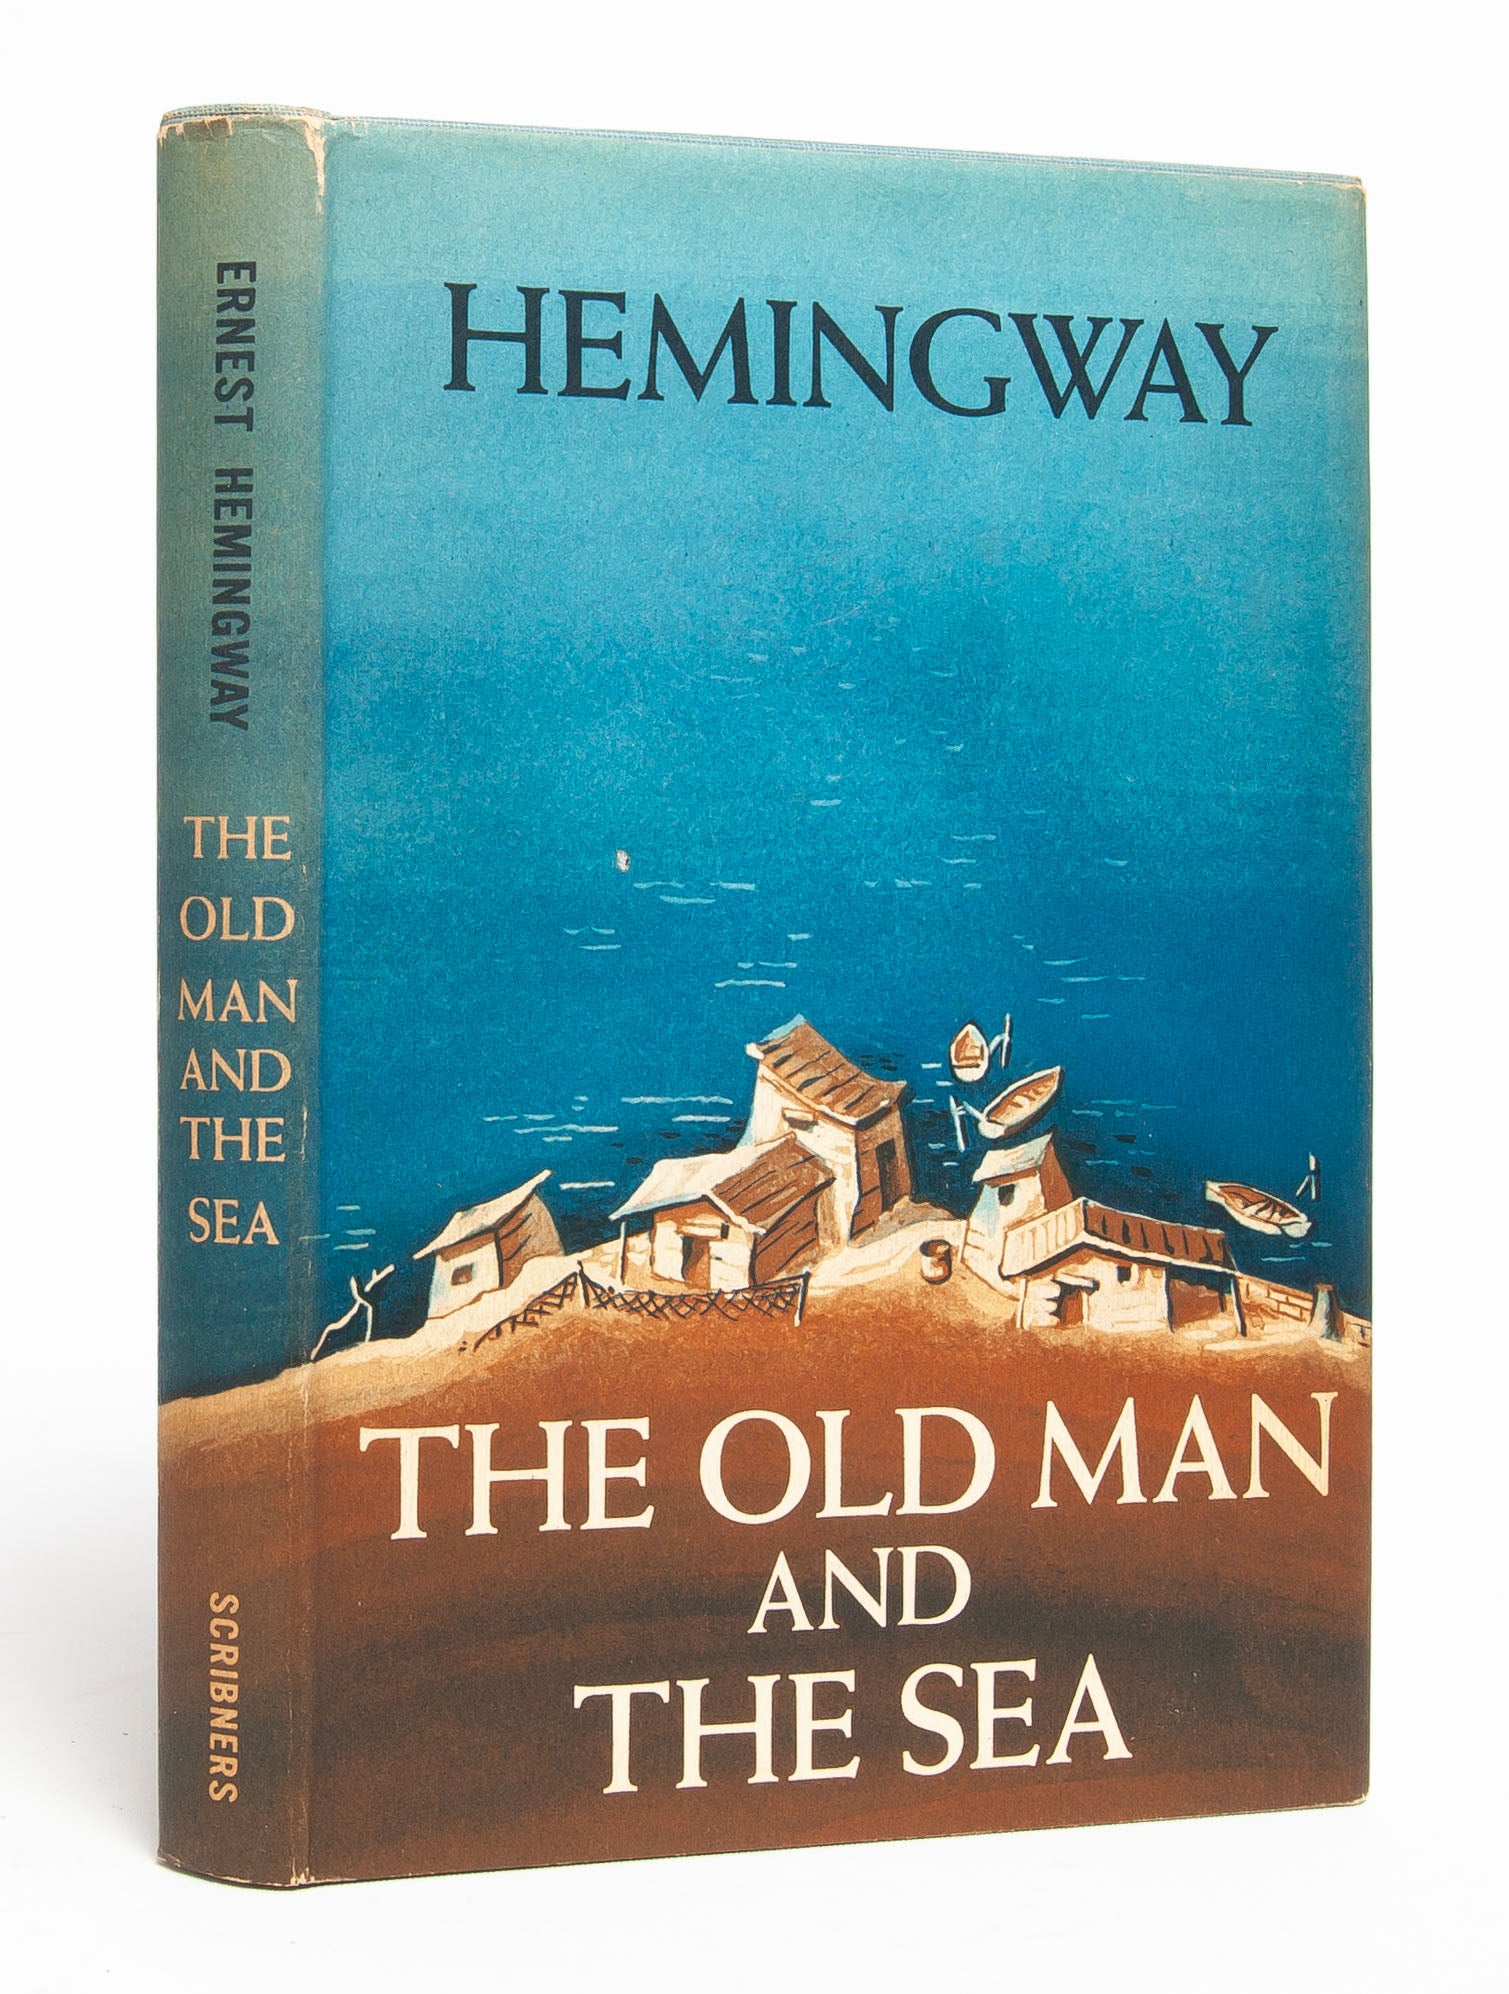 (Item #5570) The Old Man and the Sea. Ernest Hemingway.